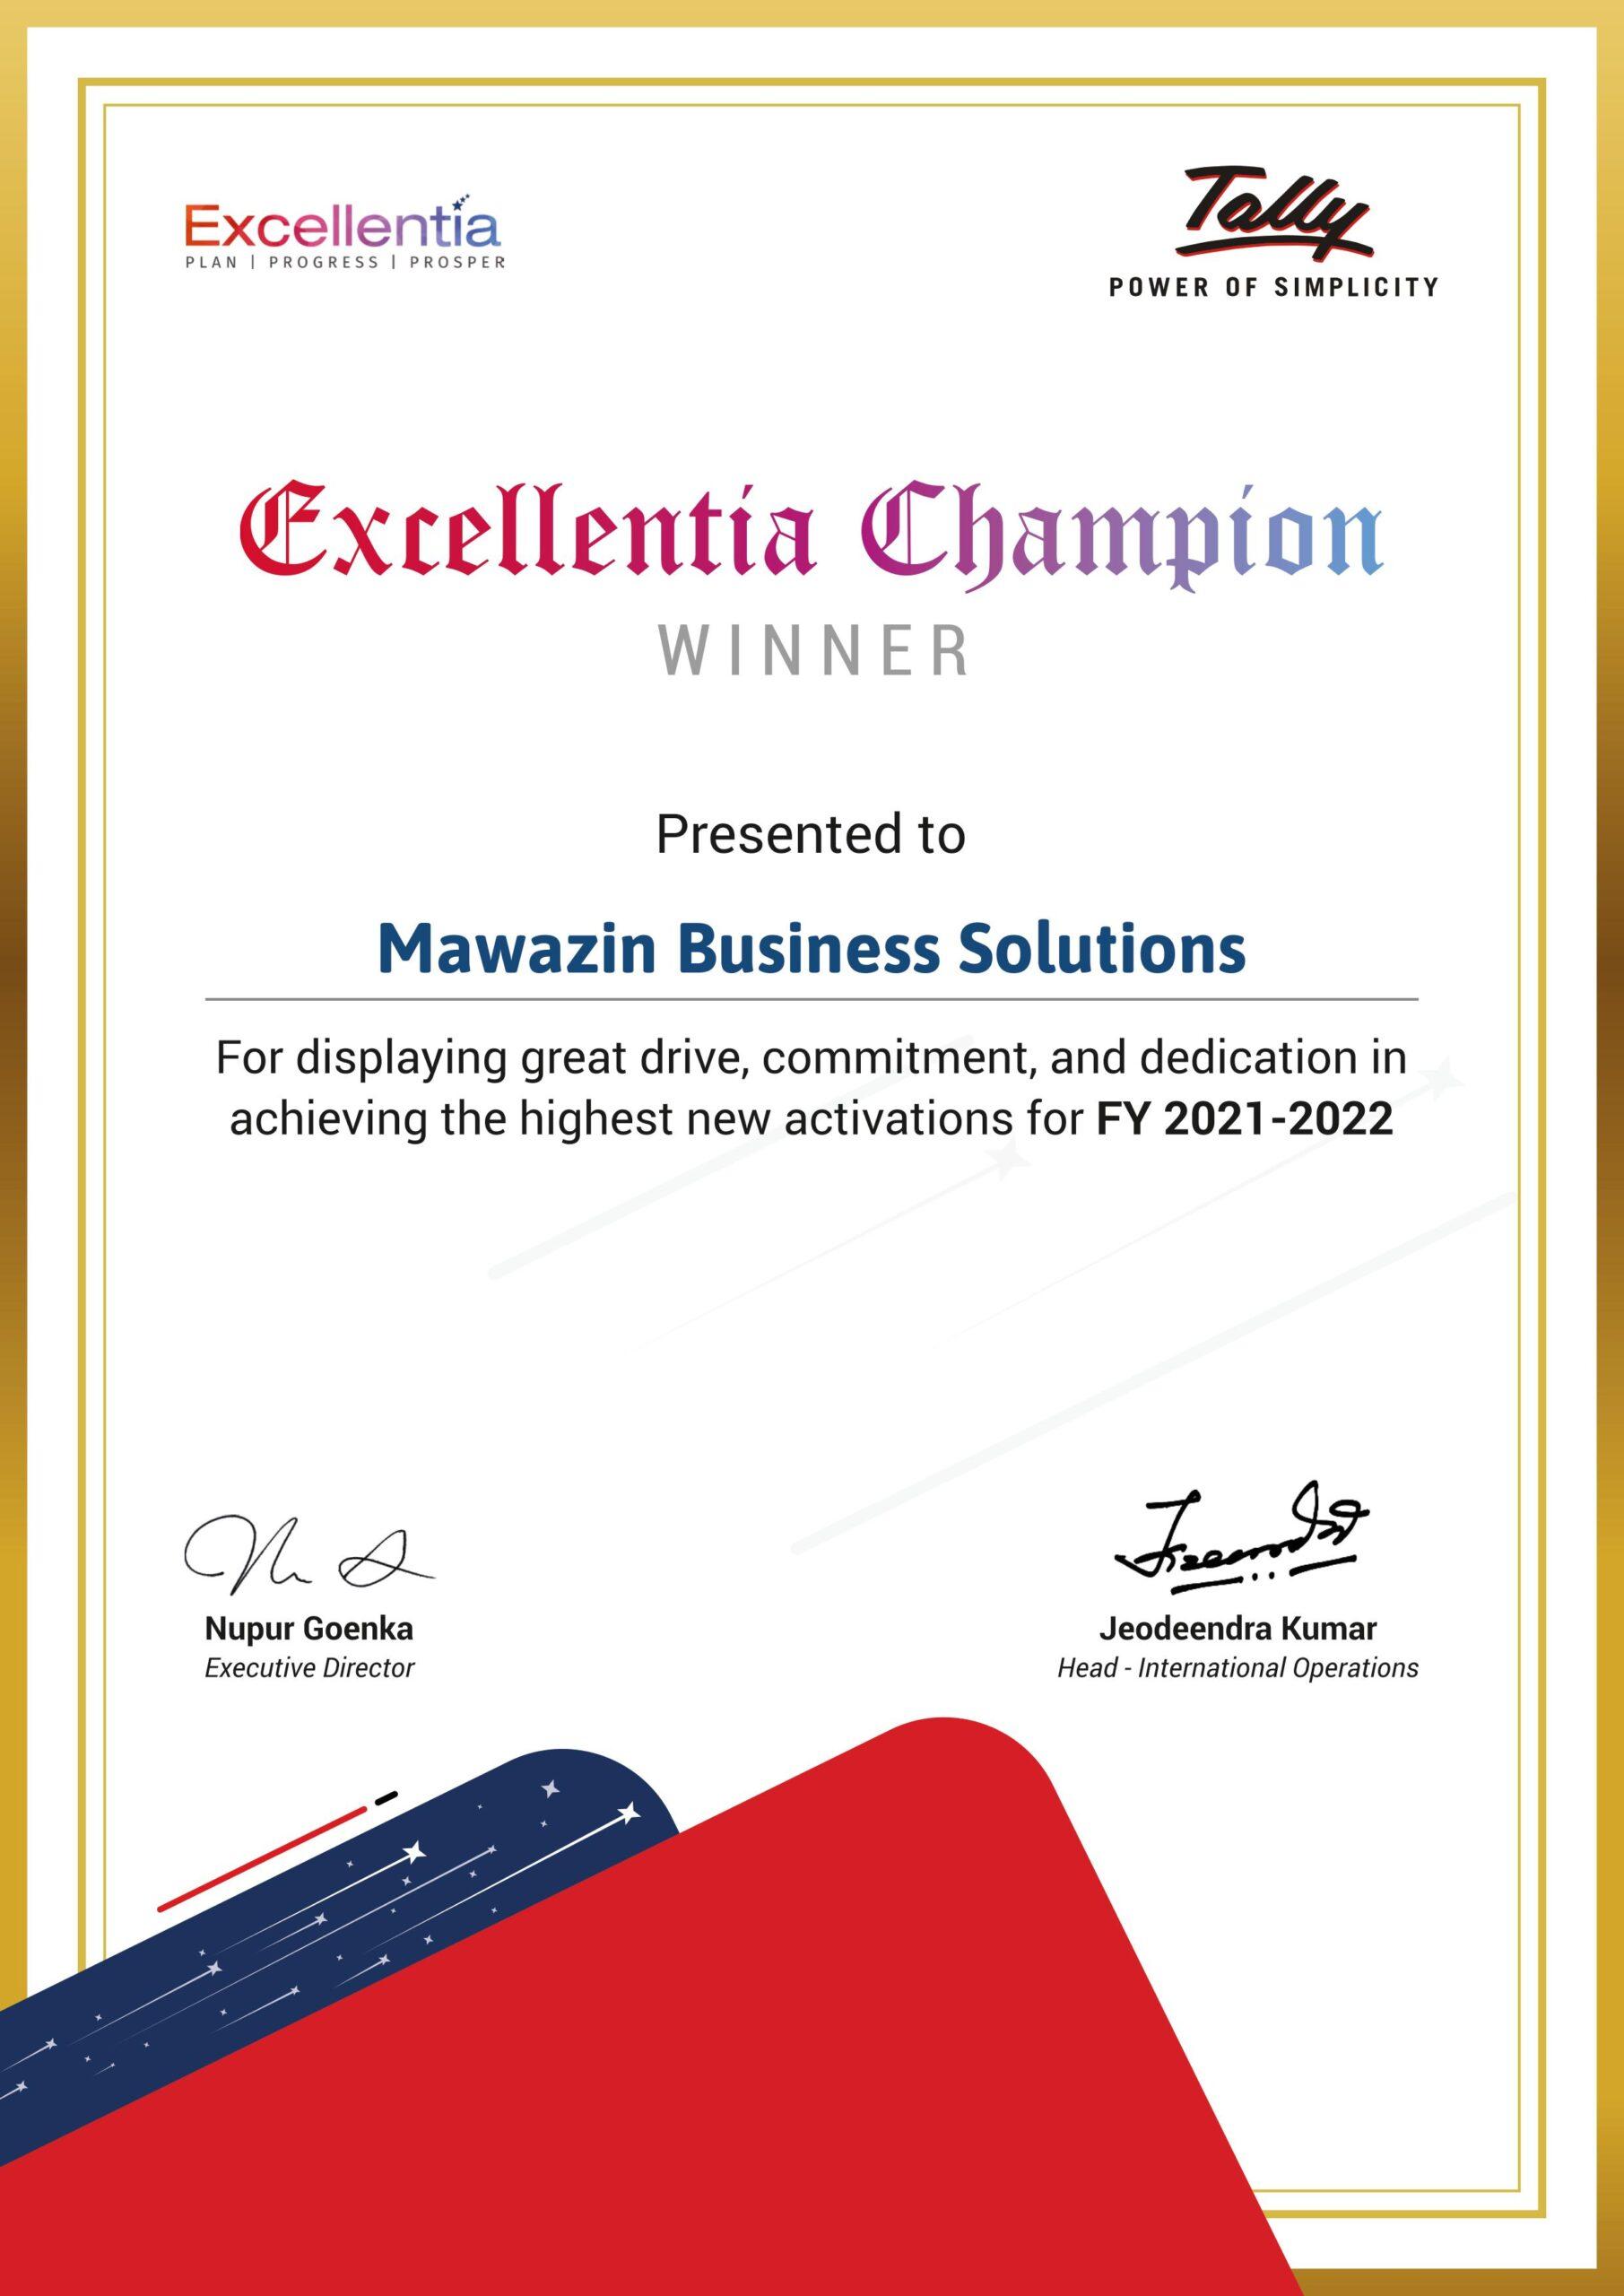 Excellentia Champions (Mawazin Business Solutions)